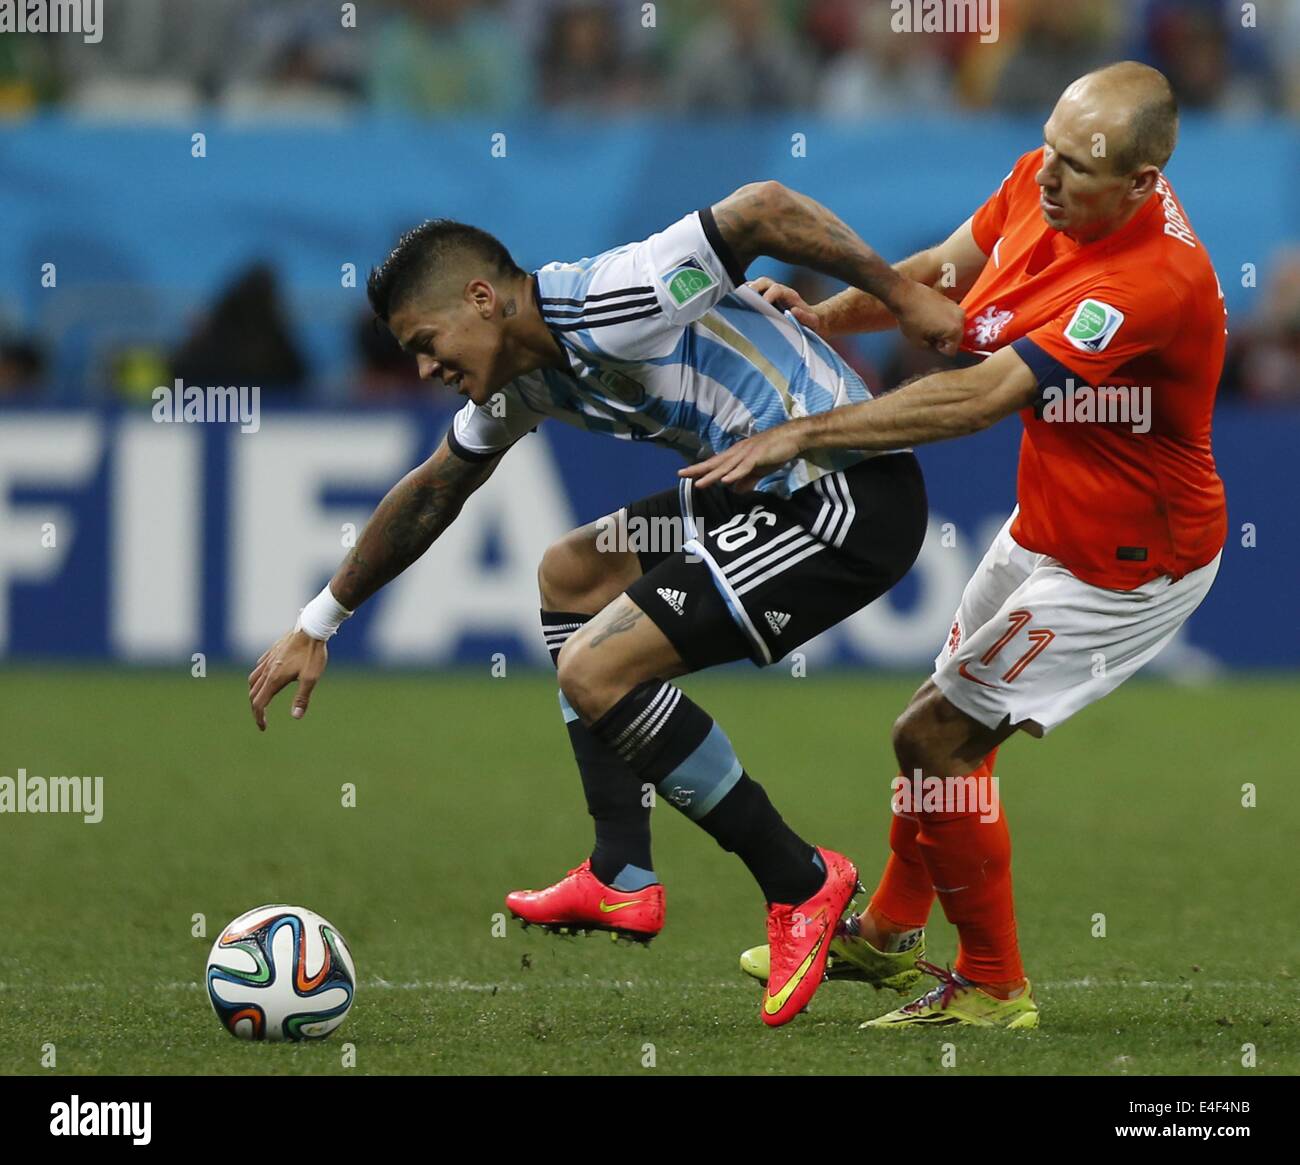 Sao Paulo, Brazil. 9th July, 2014. Argentina's Marcos Rojo (L) vies with Netherlands' Arjen Robben during a semifinal match between Netherlands and Argentina of 2014 FIFA World Cup at the Arena de Sao Paulo Stadium in Sao Paulo, Brazil, on July 9, 2014. Argentina won 4-2 on penalties over Netherlands after a 0-0 tie and qualified for the final on Wednesday. Credit:  Wang Lili/Xinhua/Alamy Live News Stock Photo